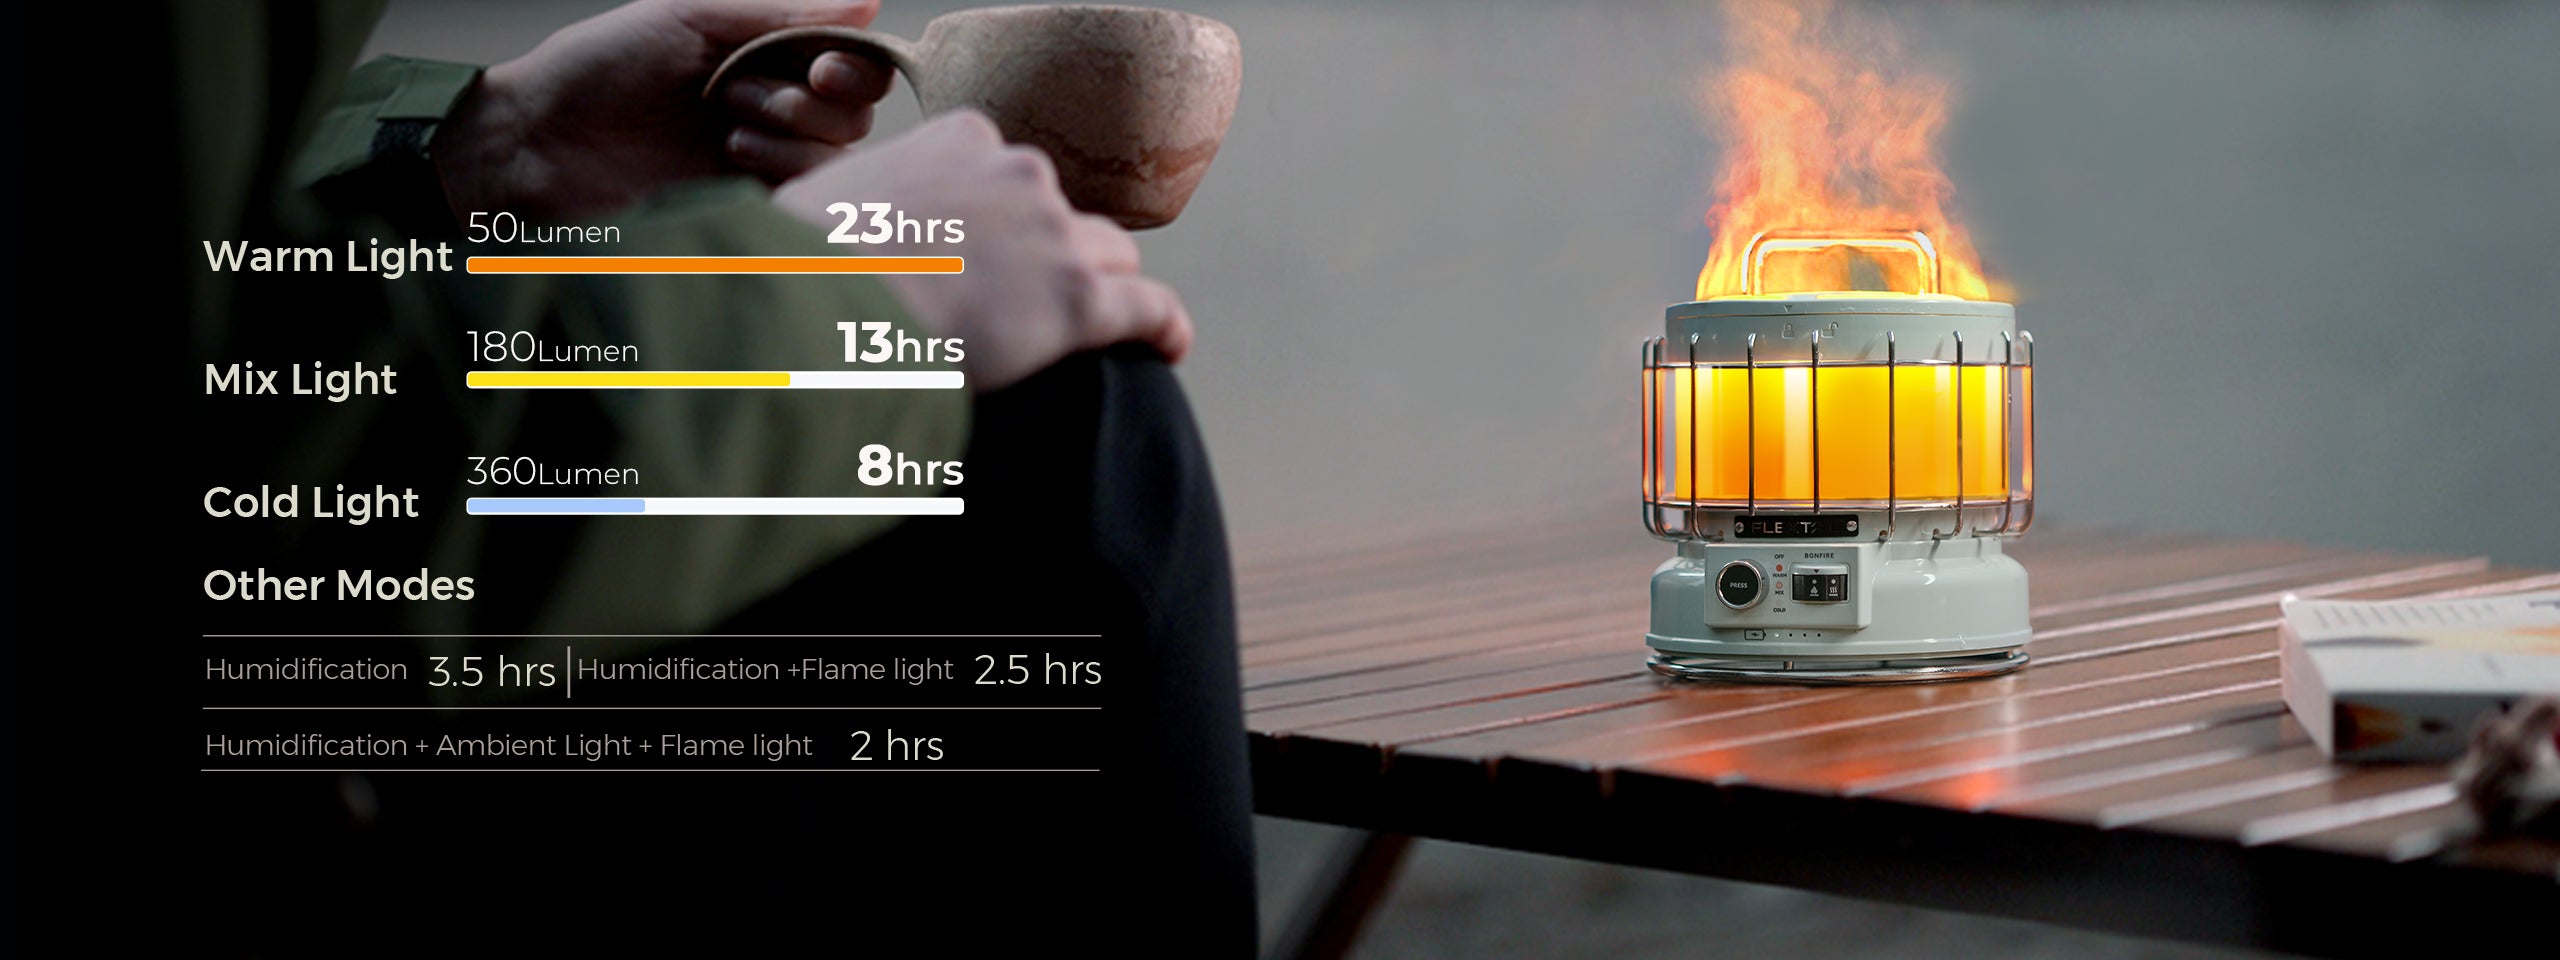 Camping Lantern With Flame 16